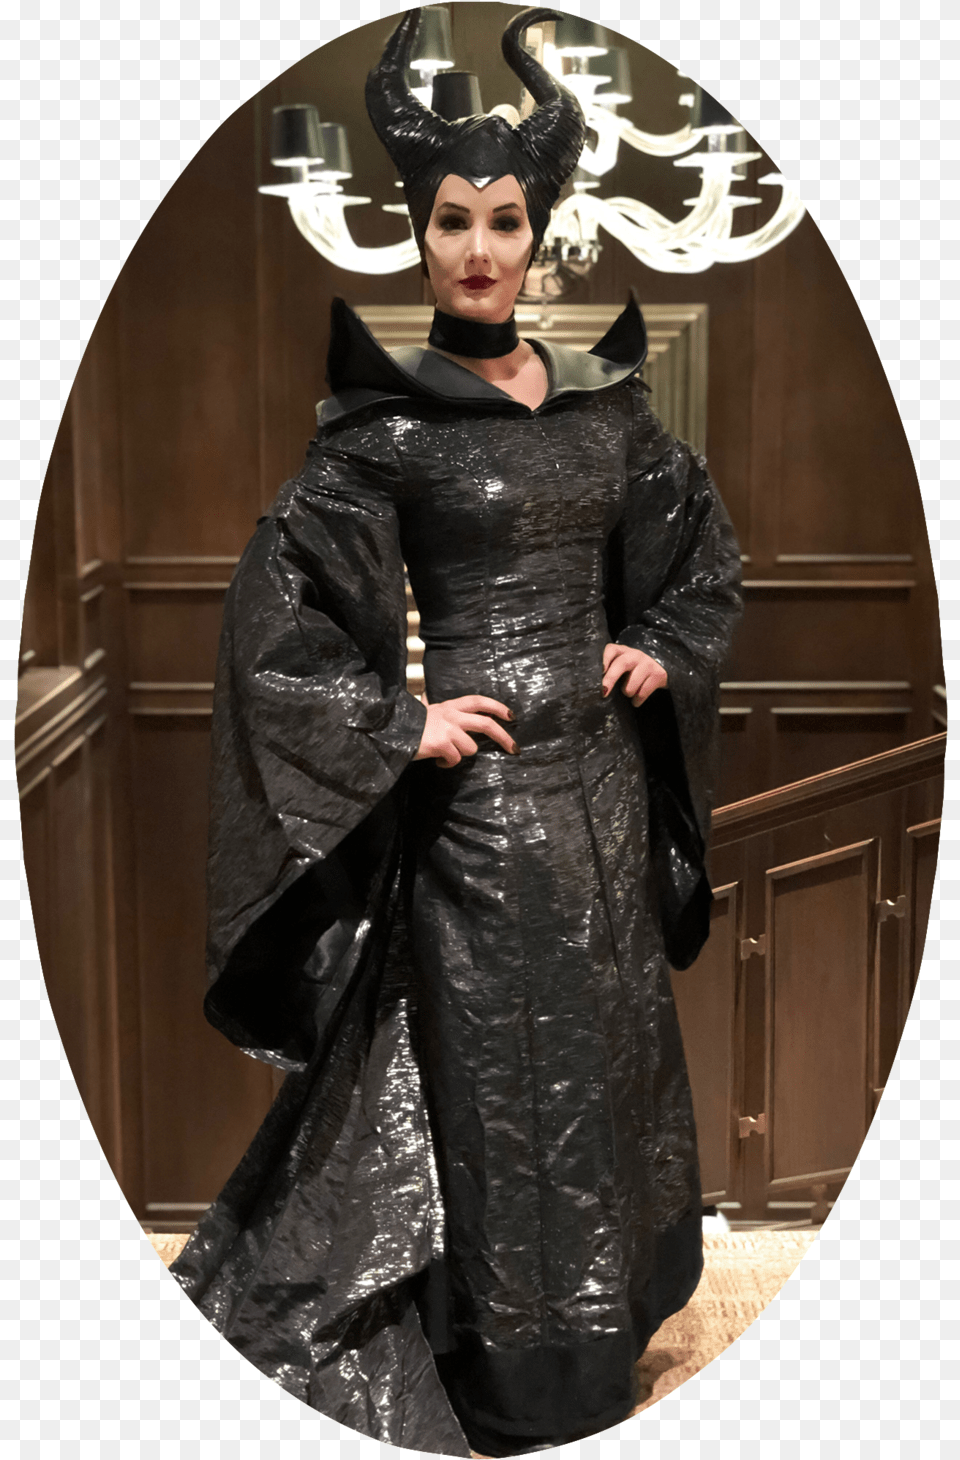 Ppbm Ac Maleficent Halloween Costume, Fashion, Clothing, Coat, Person Png